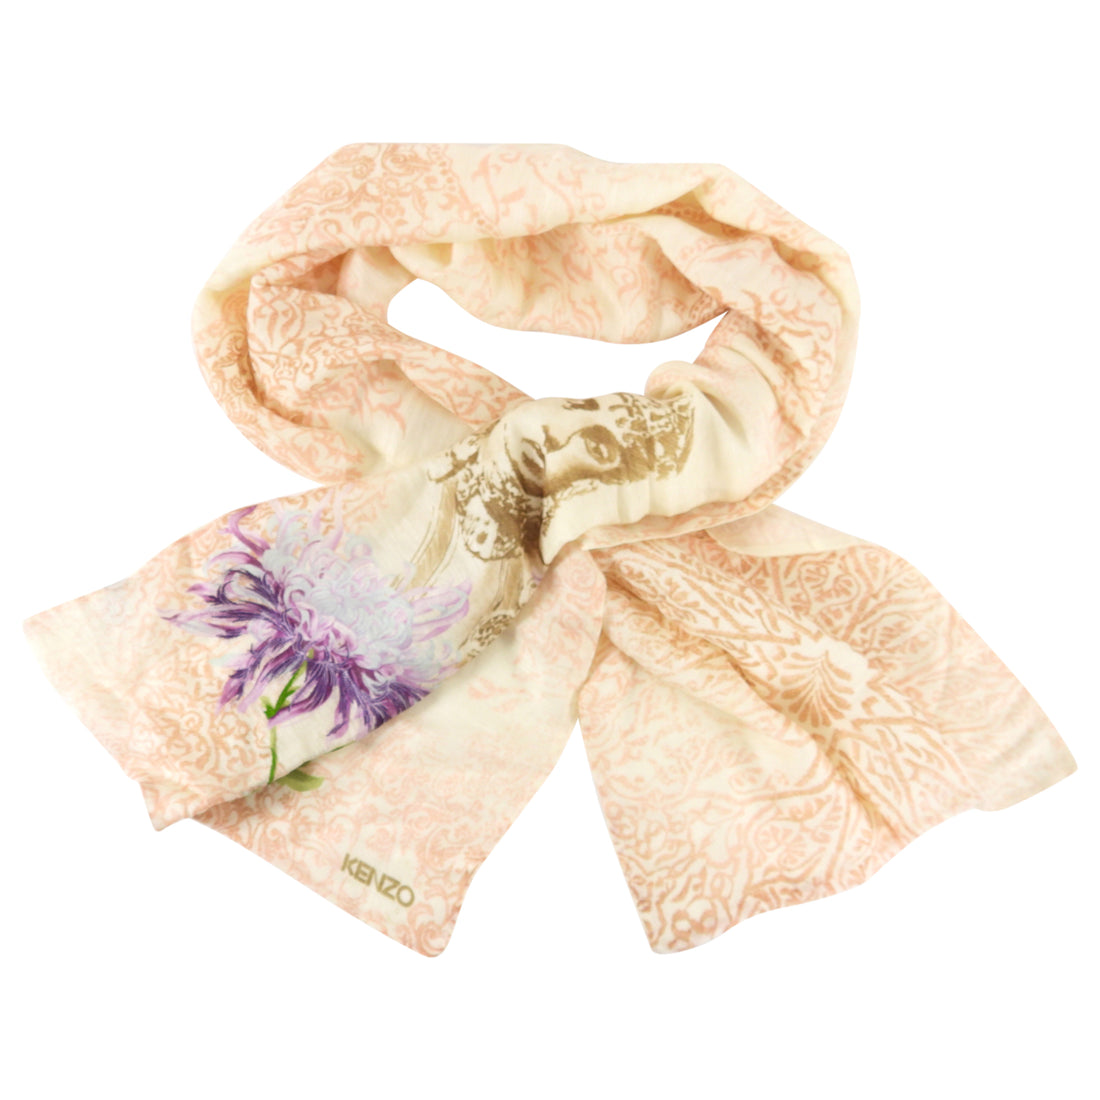 Kenzo Vintage Ivory Floral Embroidered Scarf